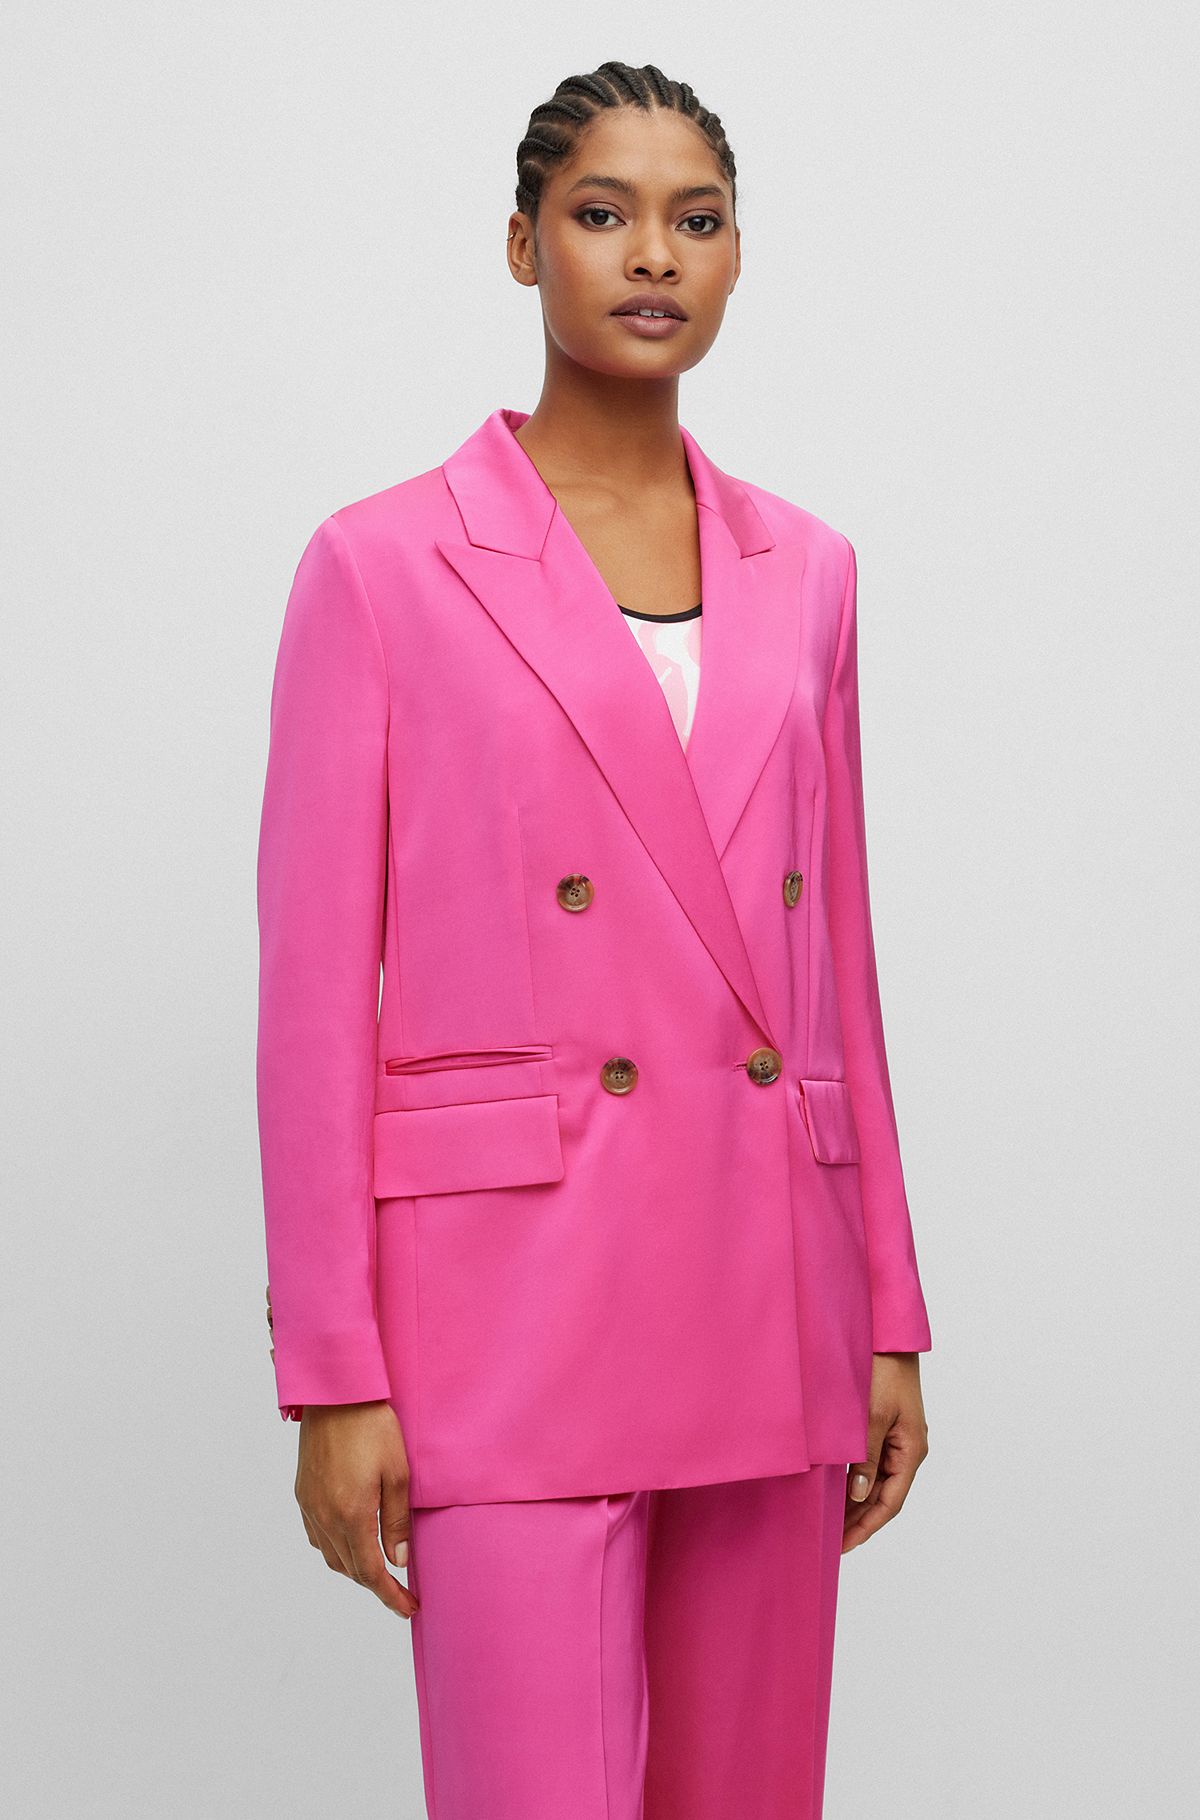 BOSS x Alica Schmidt regular-fit jacket with double-breasted front, Pink